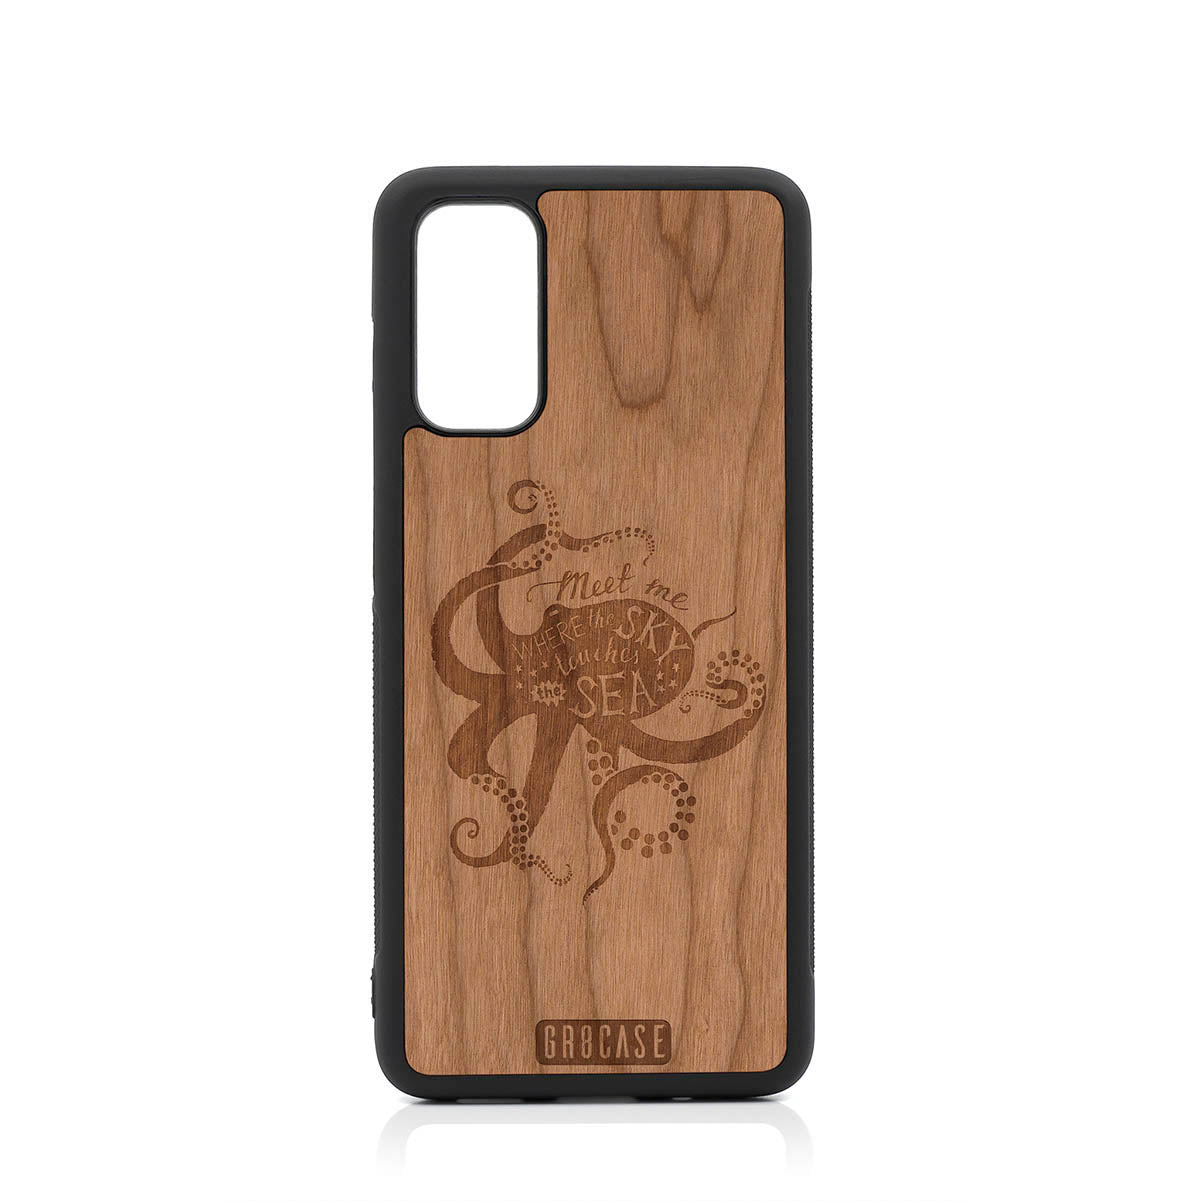 Meet Me Where The Sky Touches The Sea (Octopus) Design Wood Case For Samsung Galaxy S20